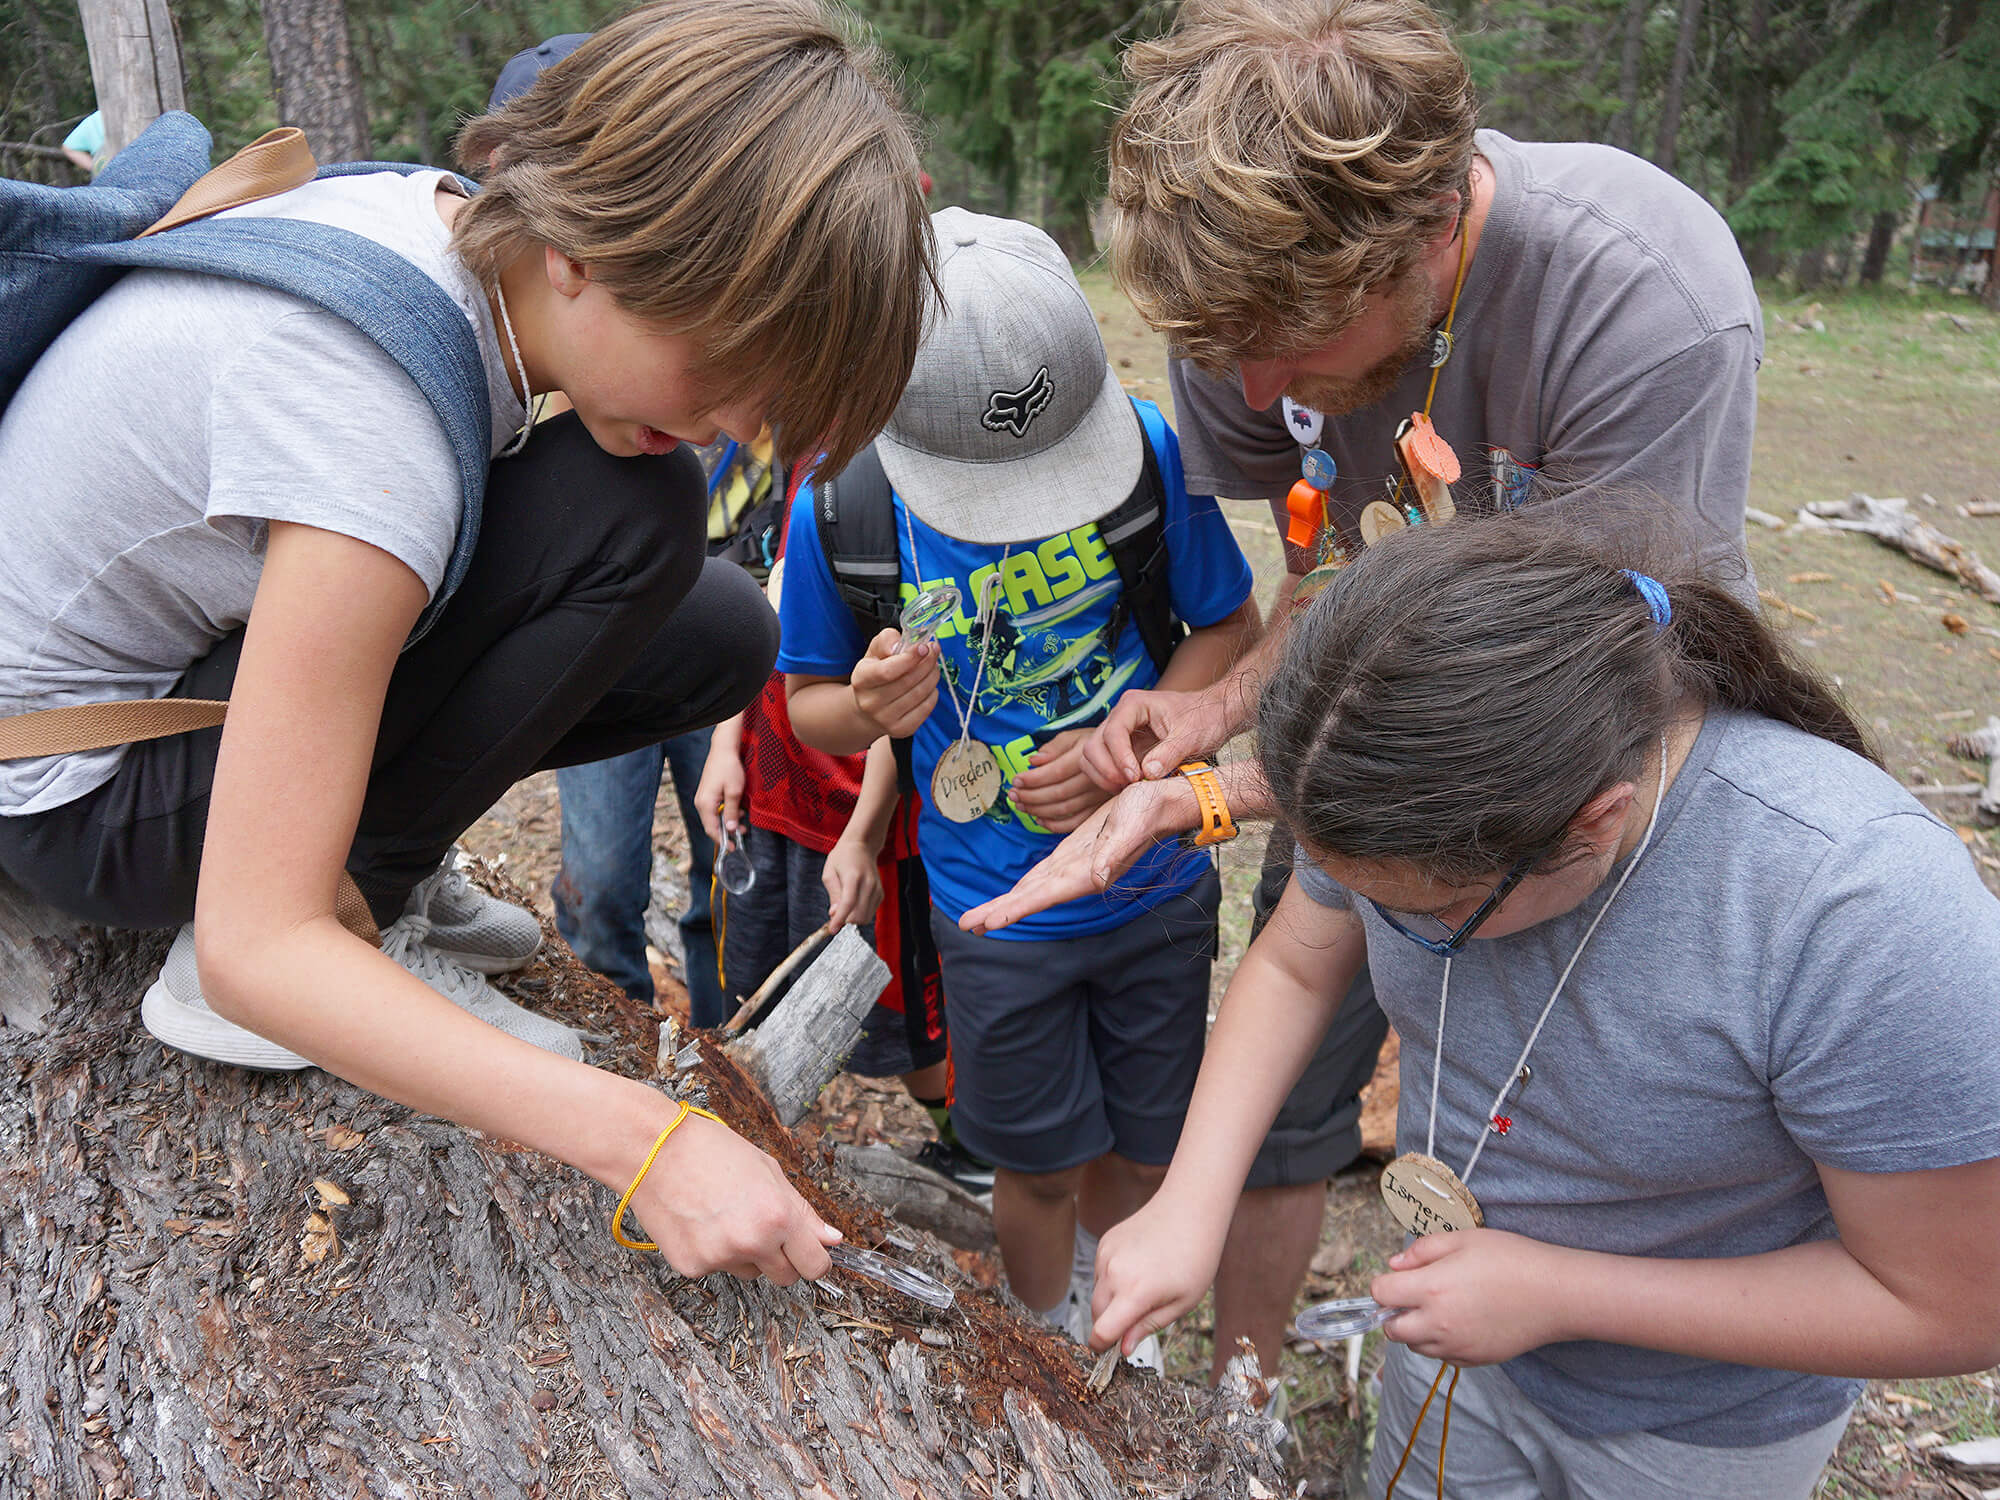 Children examine tree bark during a science lesson